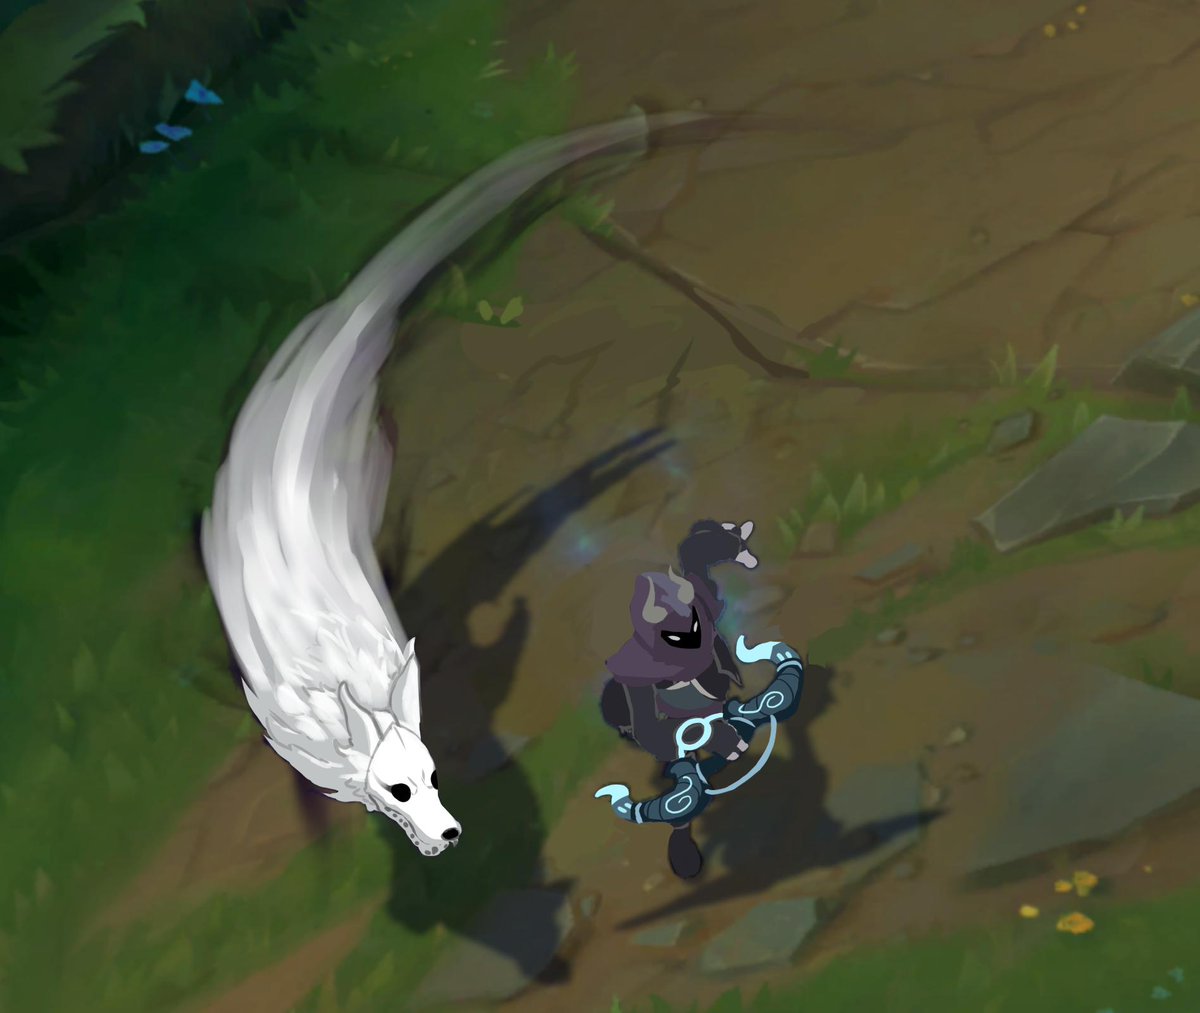 Talking about Kindred skins ... here's my Reaper Kindred skin concept....